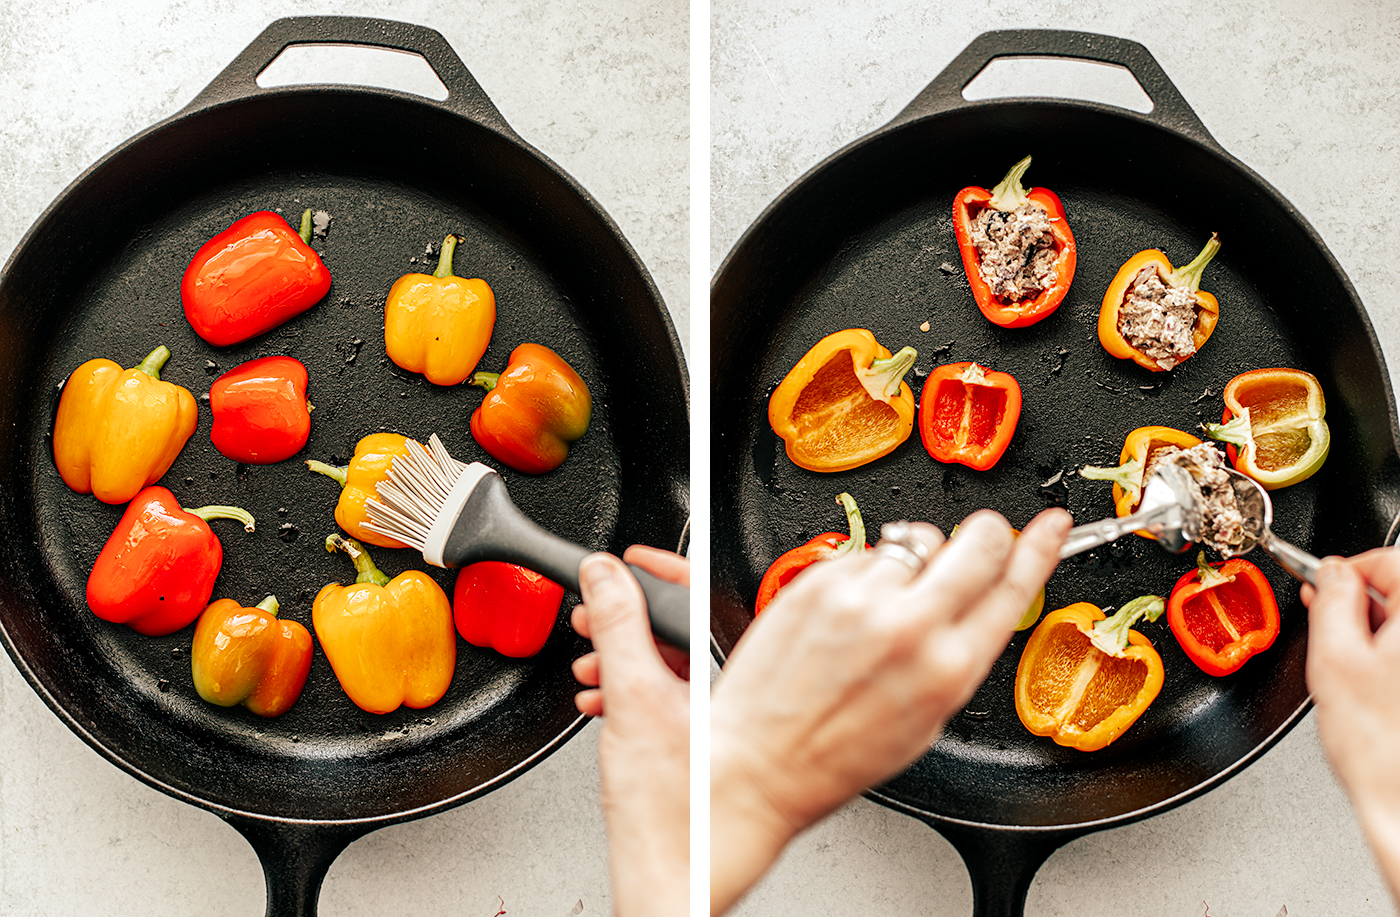 Cast iron skillet with peppers in it being oiled and stuffed.